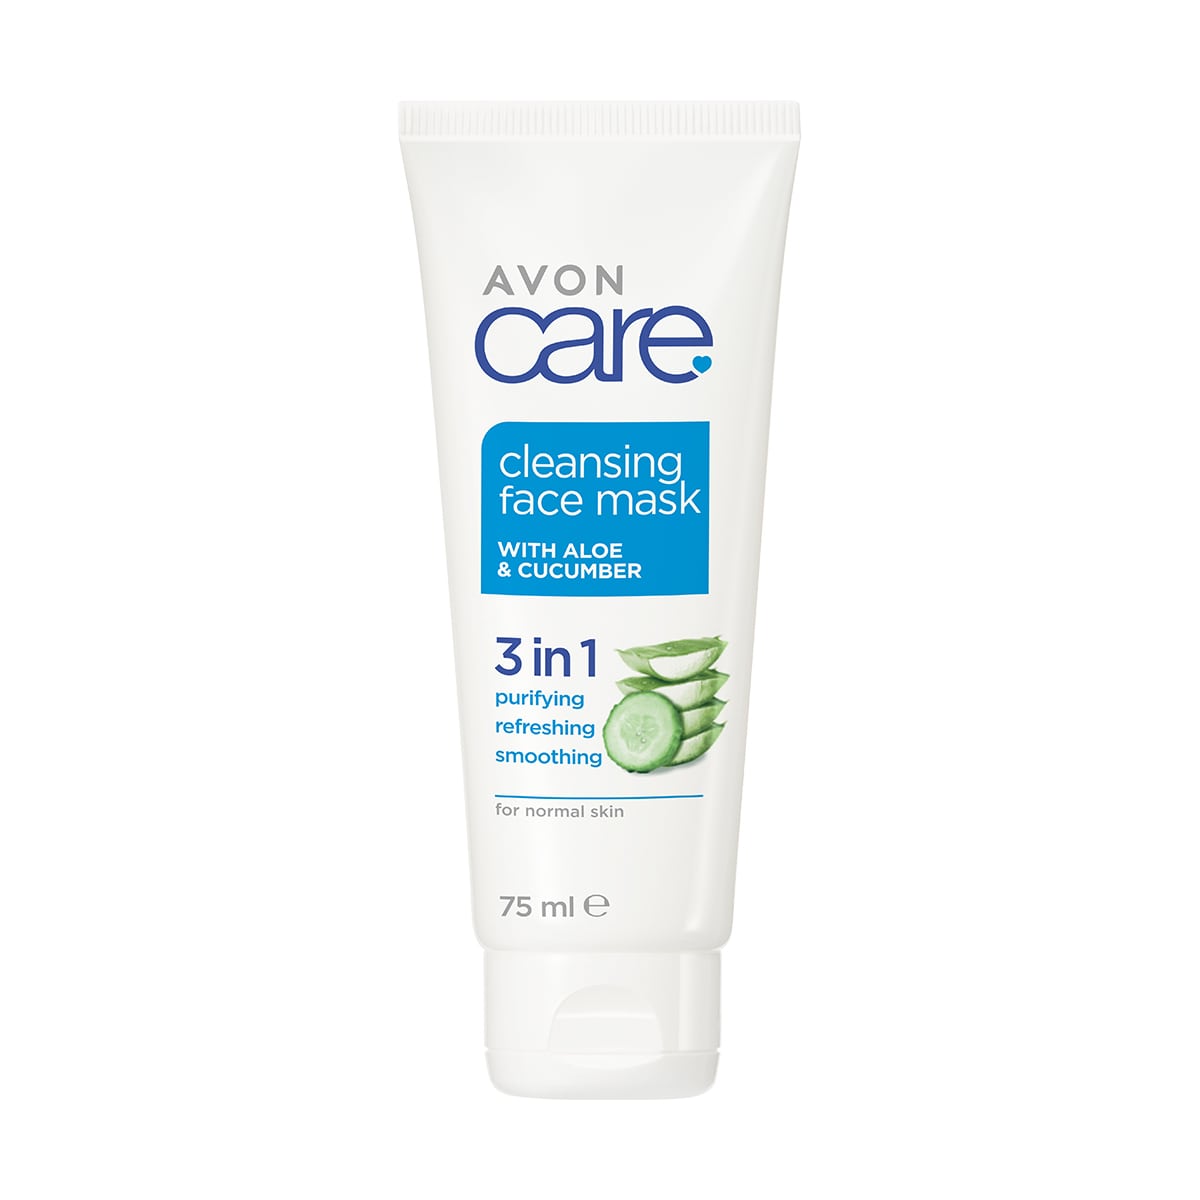 Avon Care Cleansing Face Mask 75ml